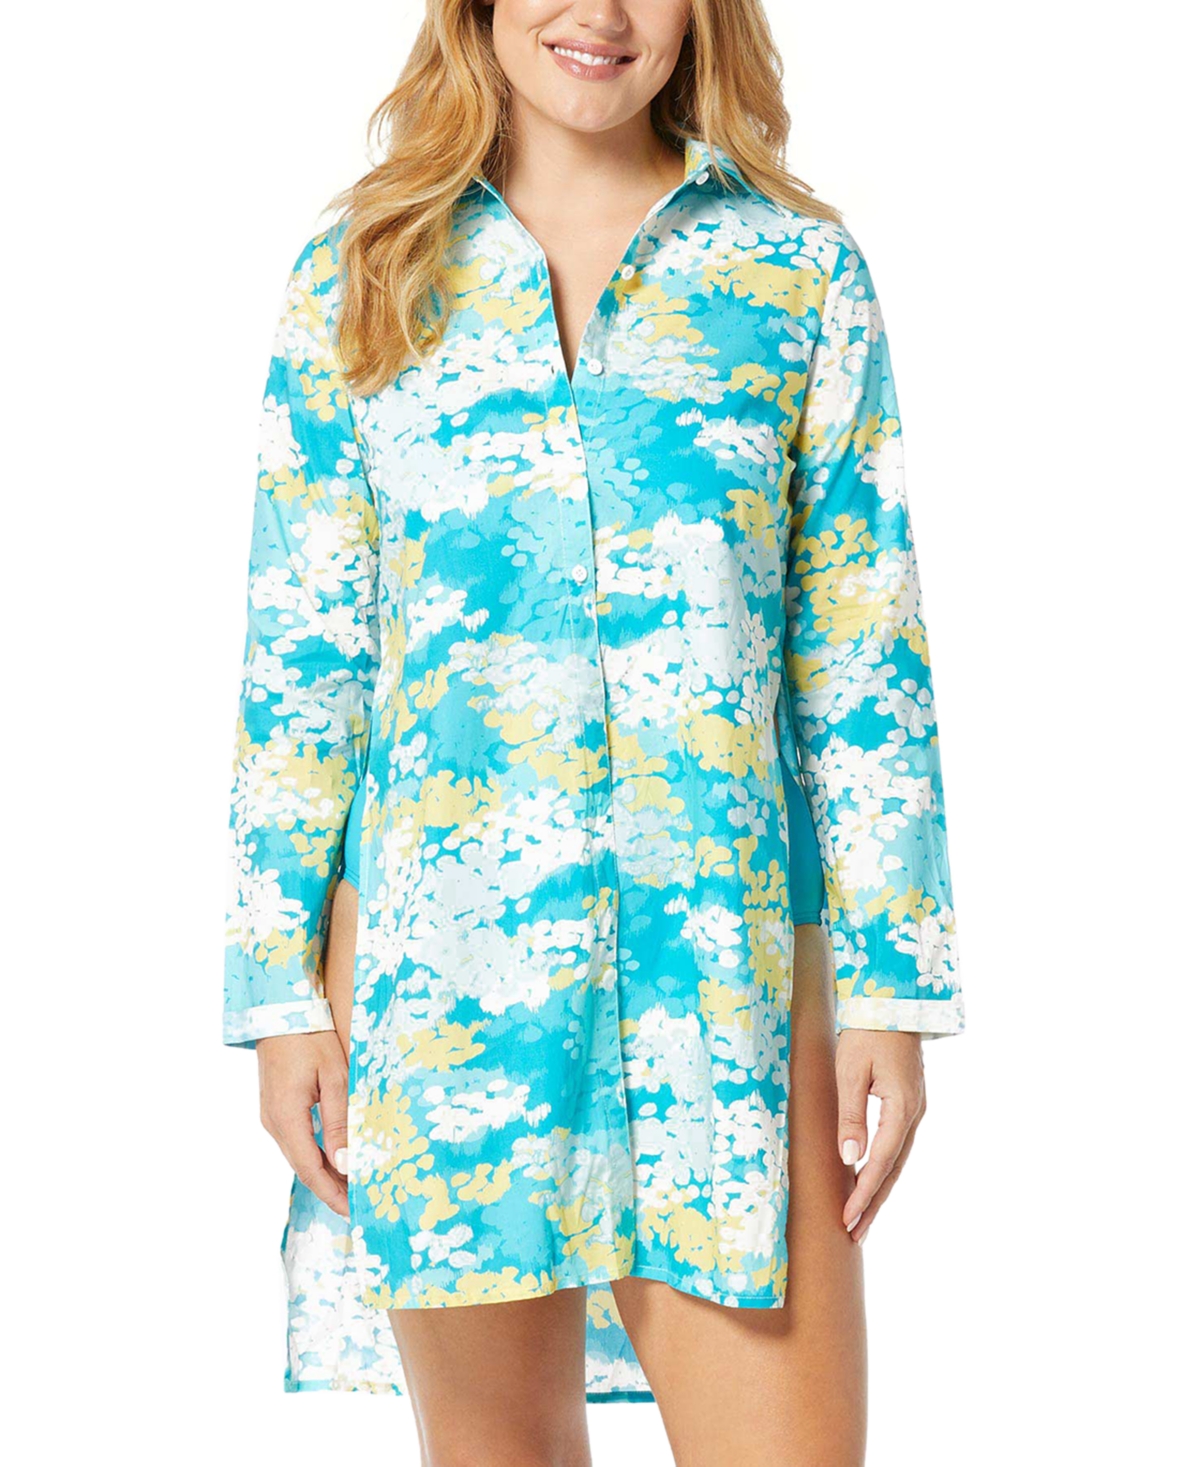 Women's Printed Cotton Cover-Up Shirt - Blue